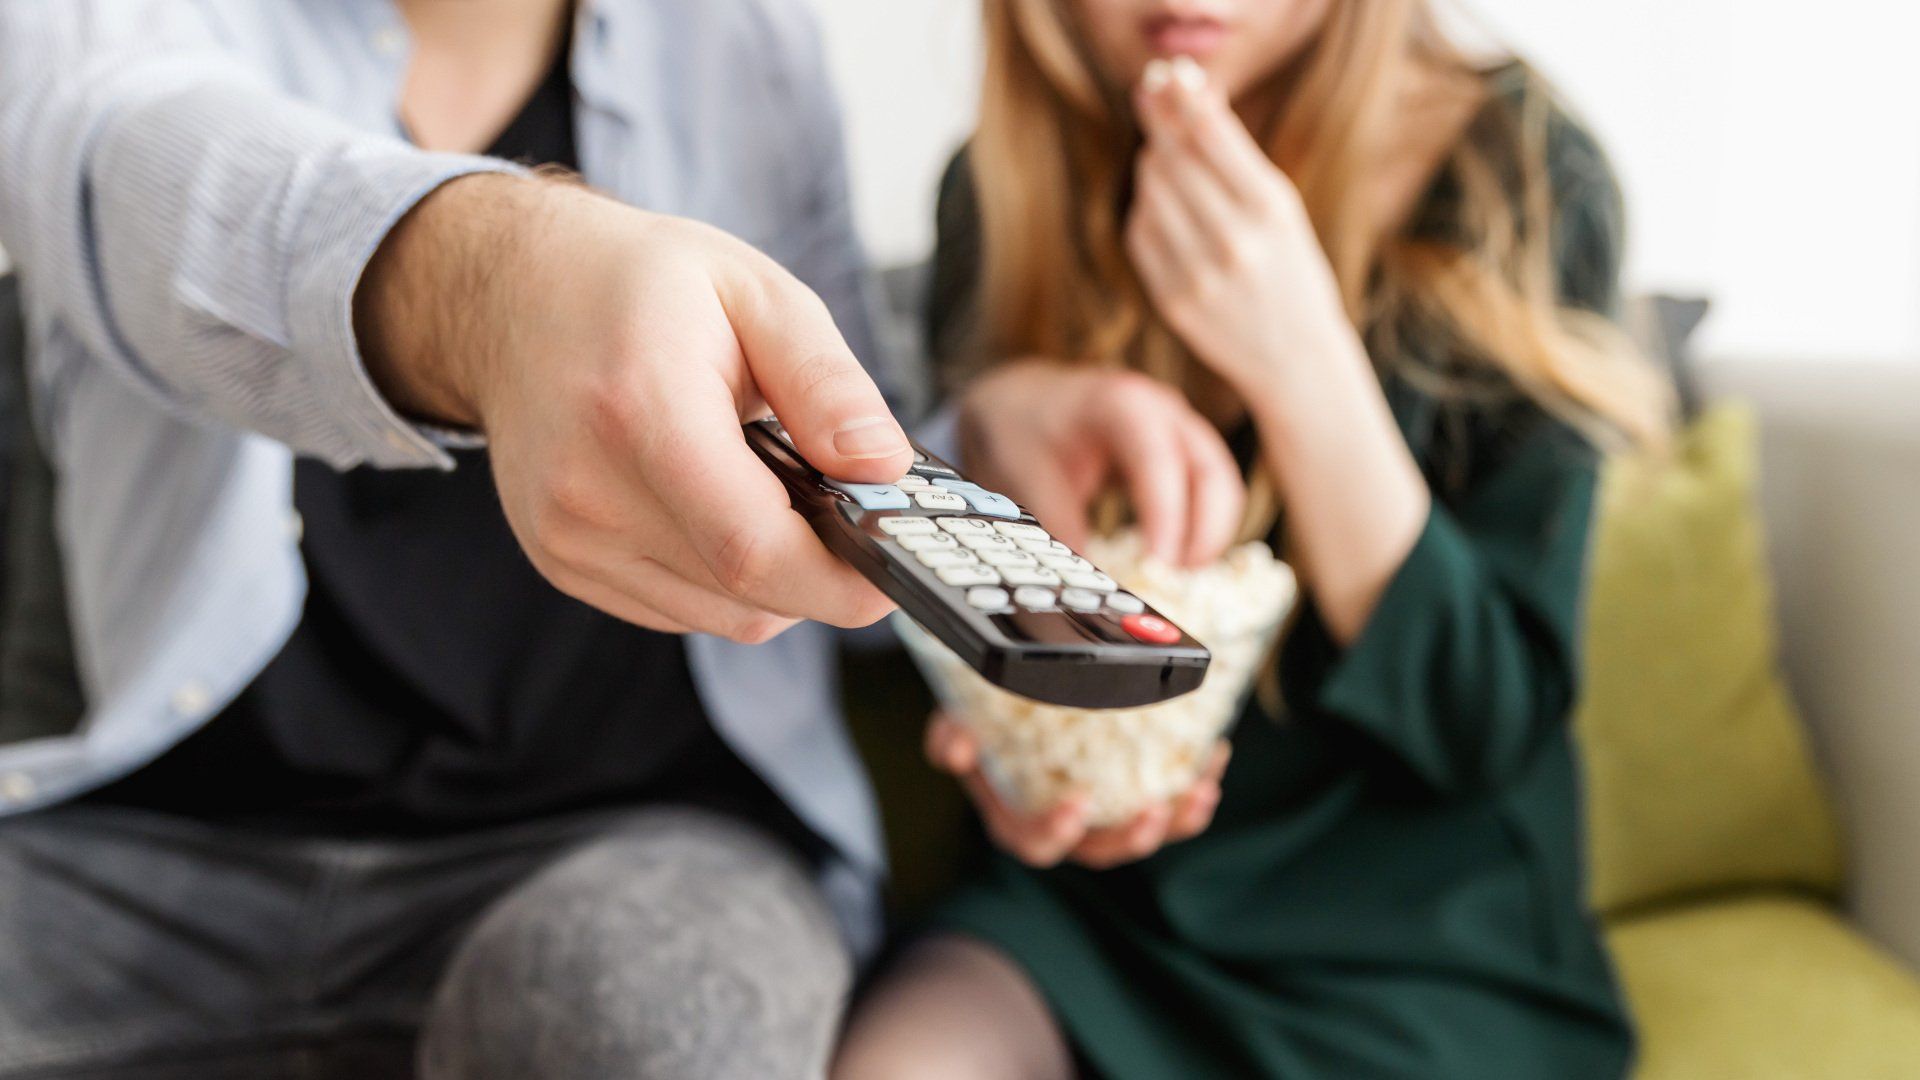 Man holding a remote control next to a woman eating popcorn.